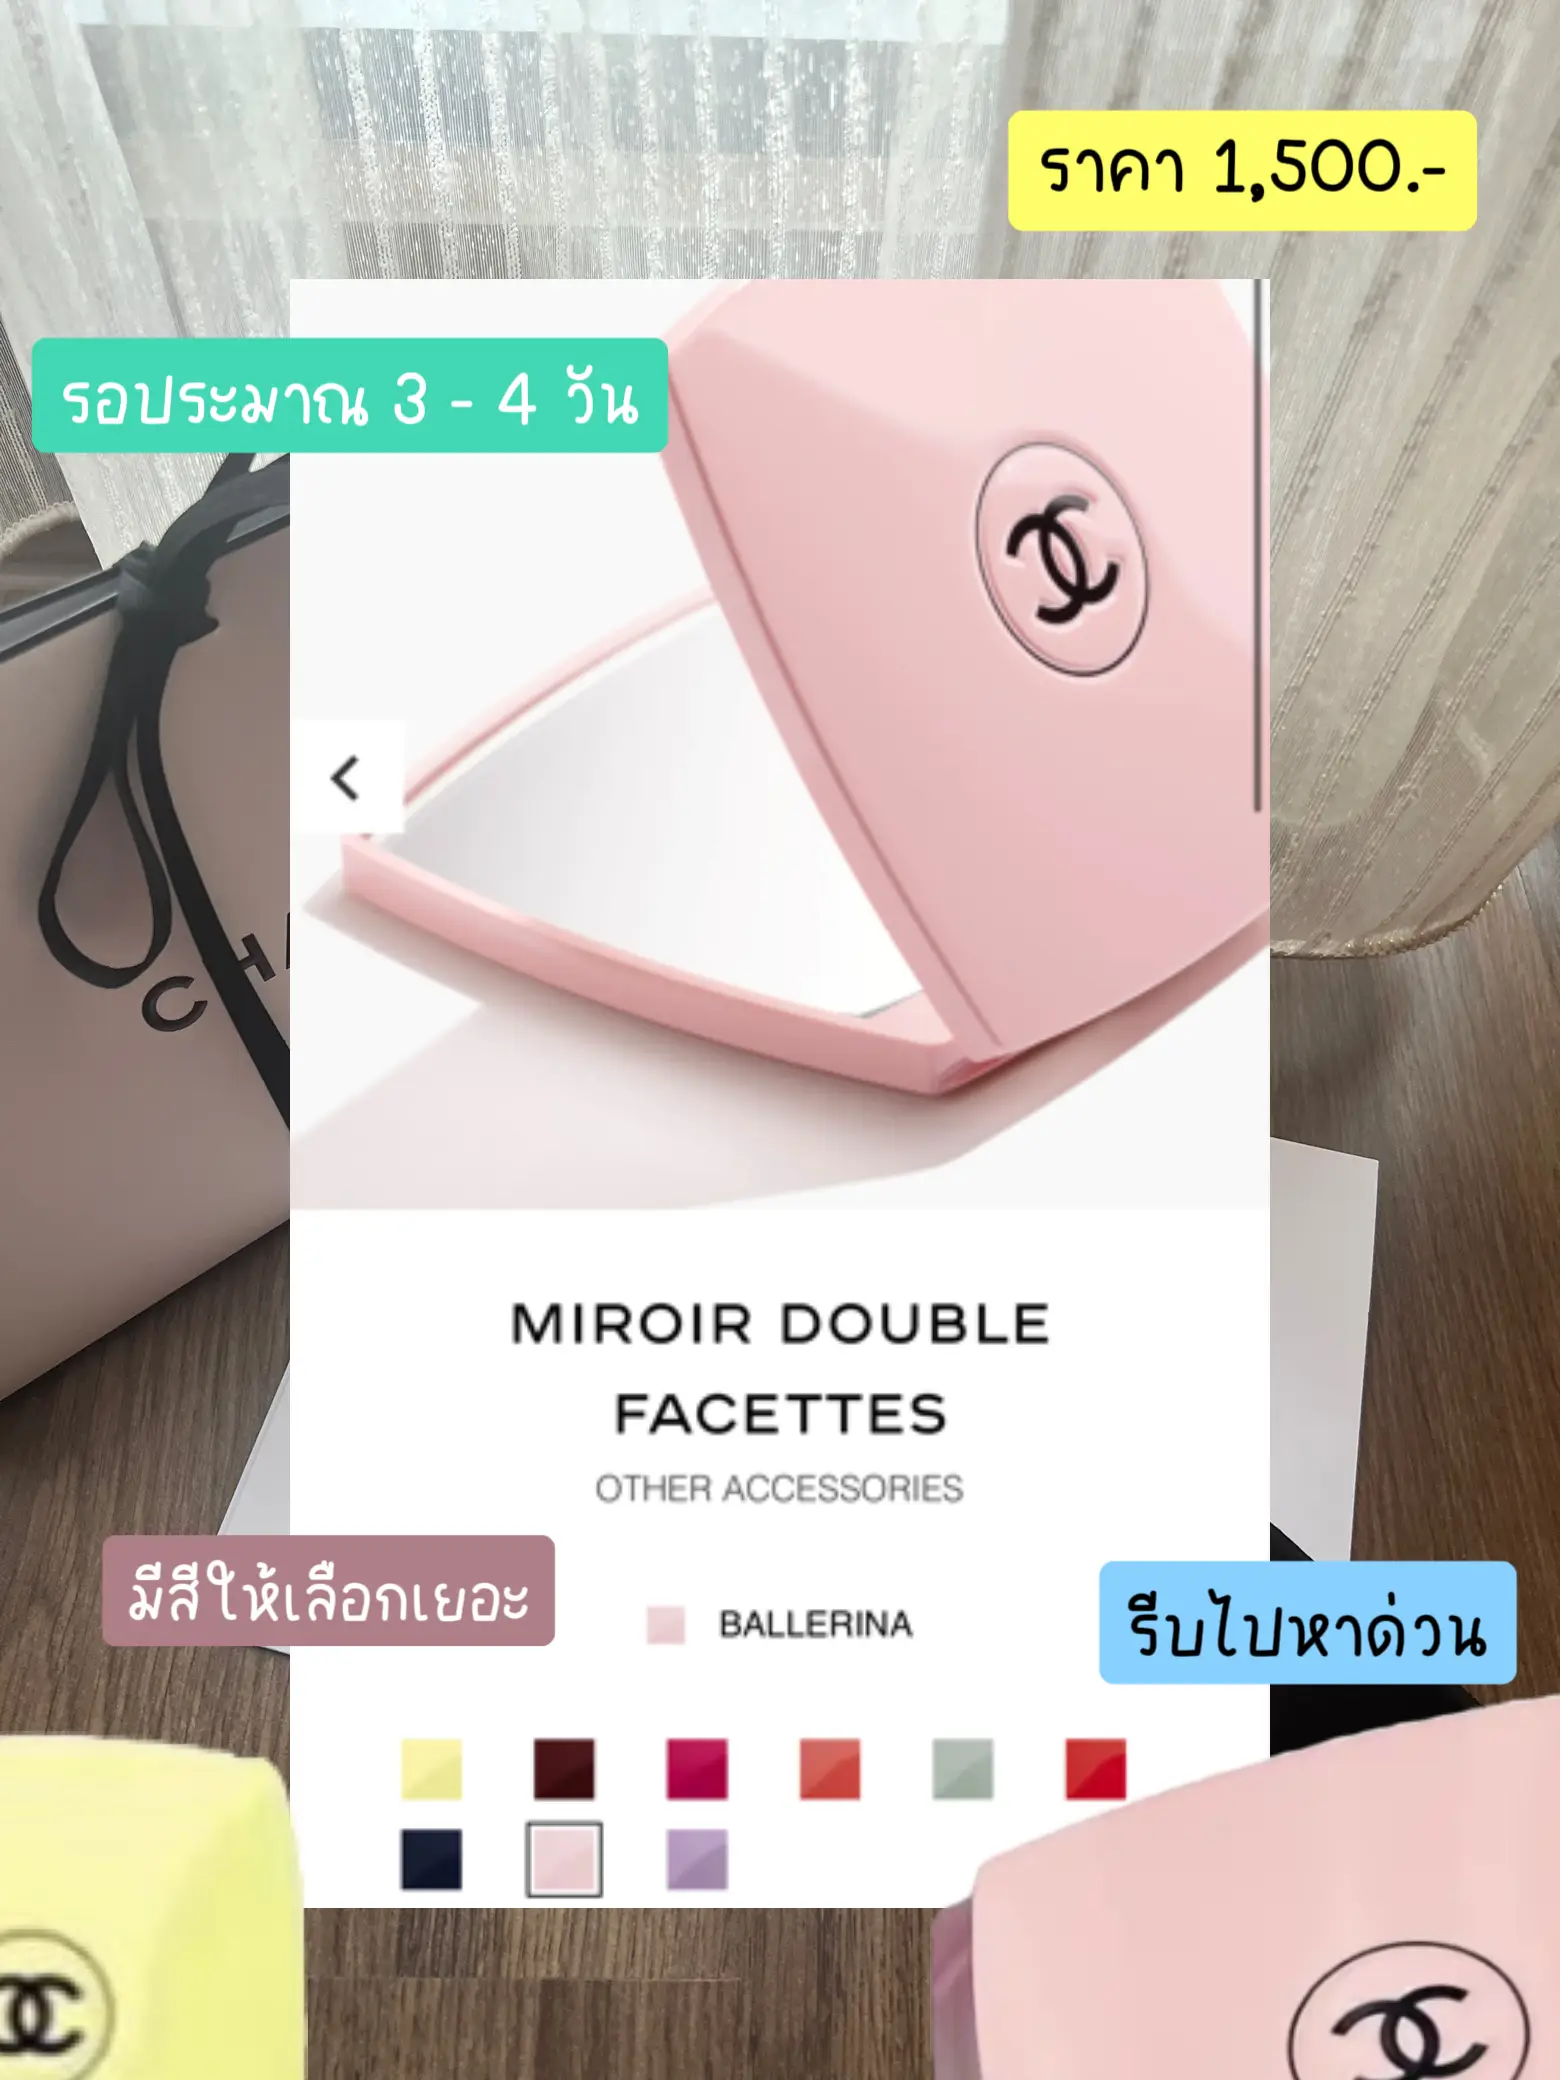 MIROIR DOUBLEFACETTES FROM Chanel   Gallery posted by fon   Lemon8